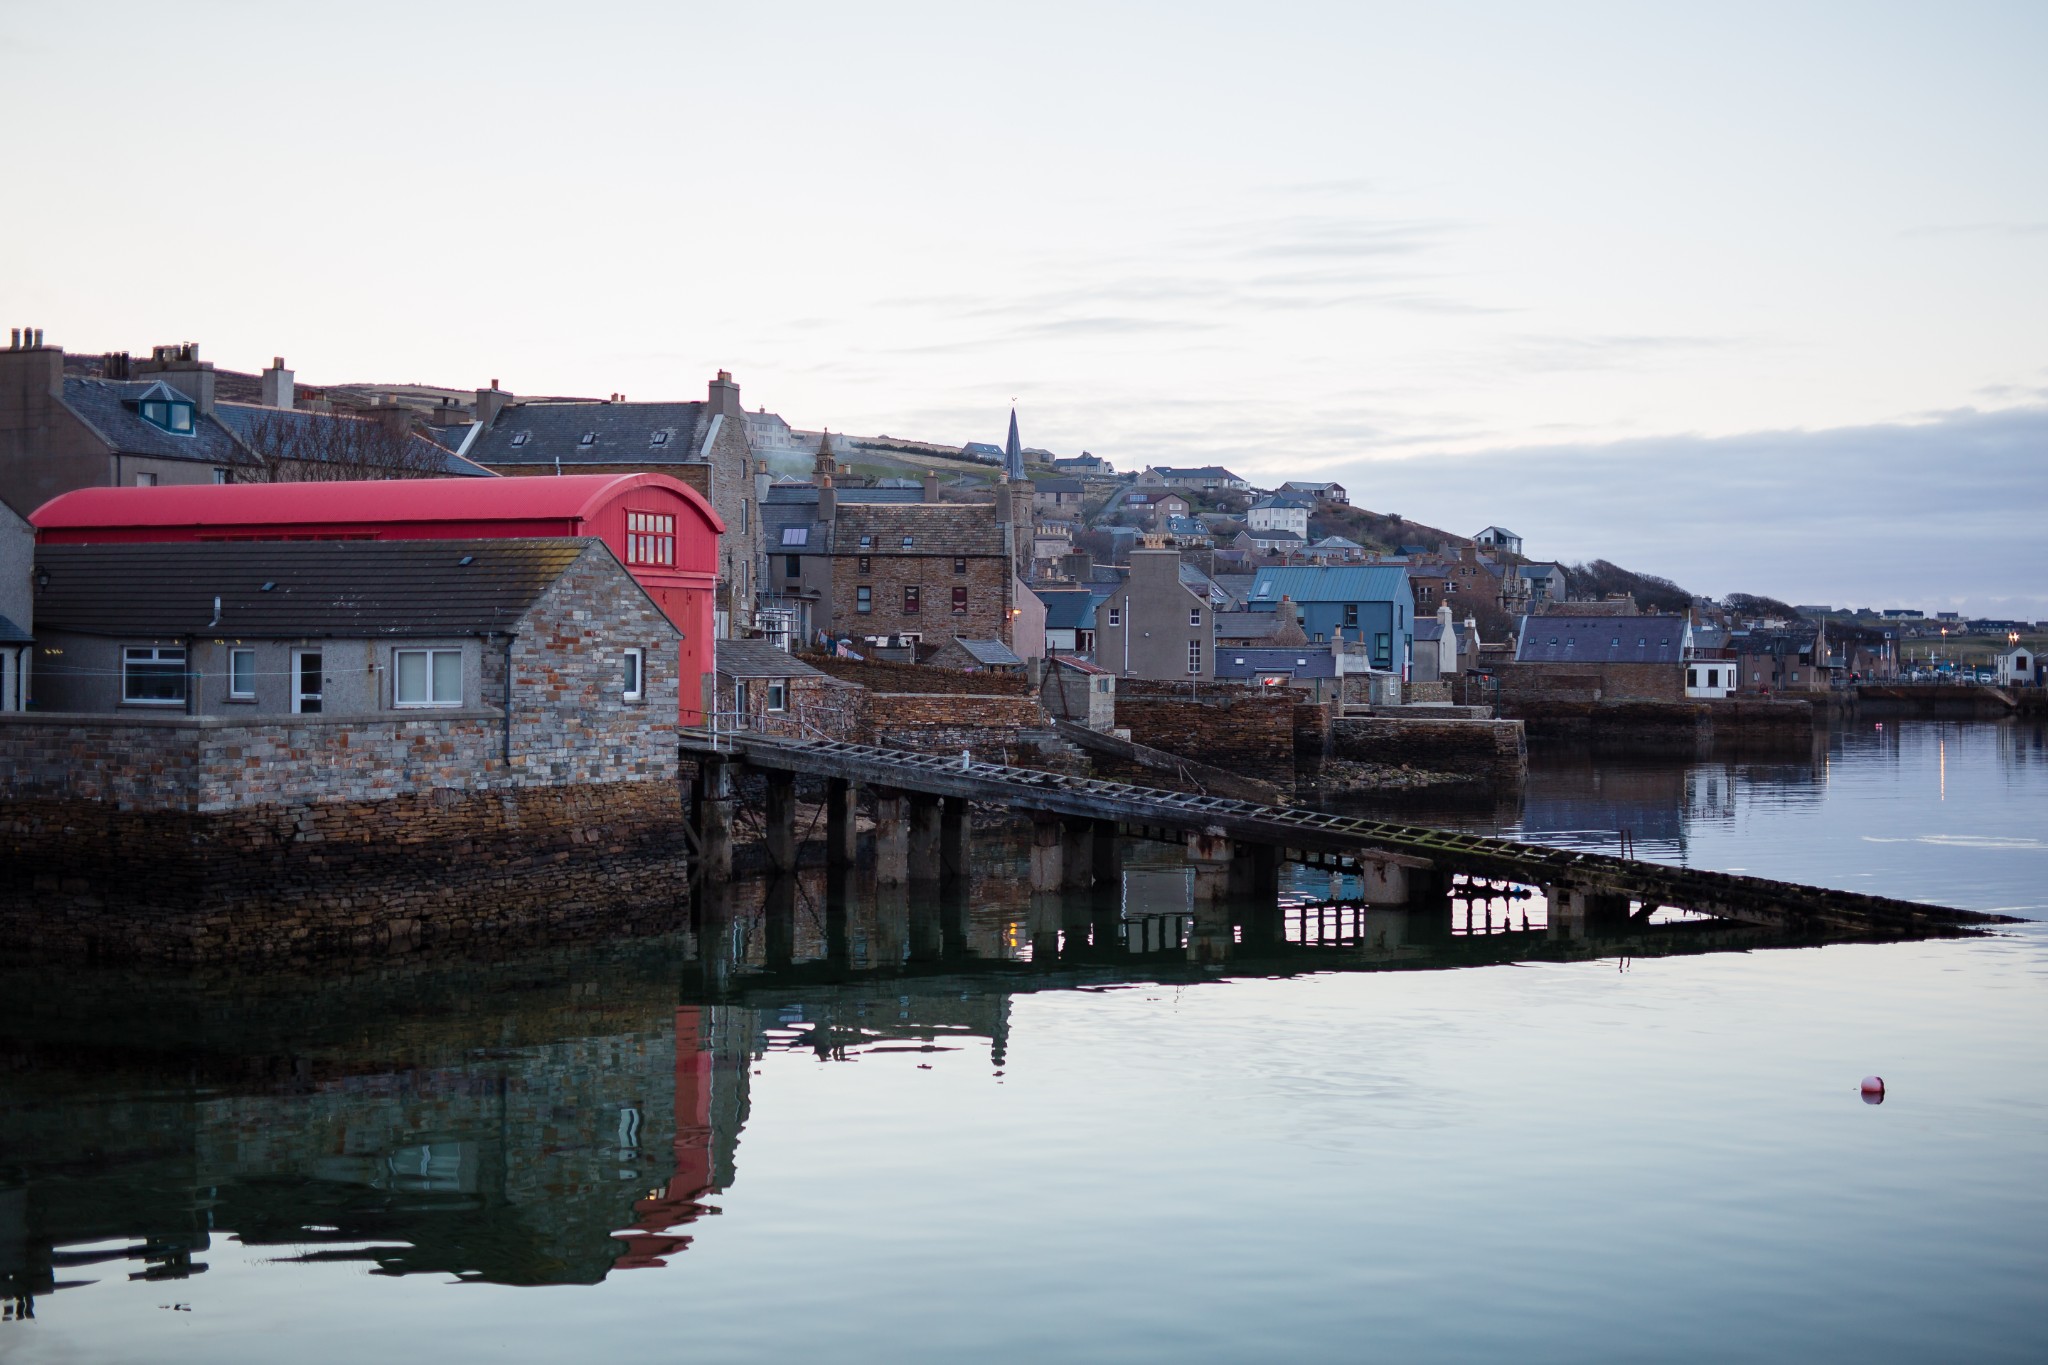 The 'Red Shed' and slipway, former home of the Stromness lifeboat